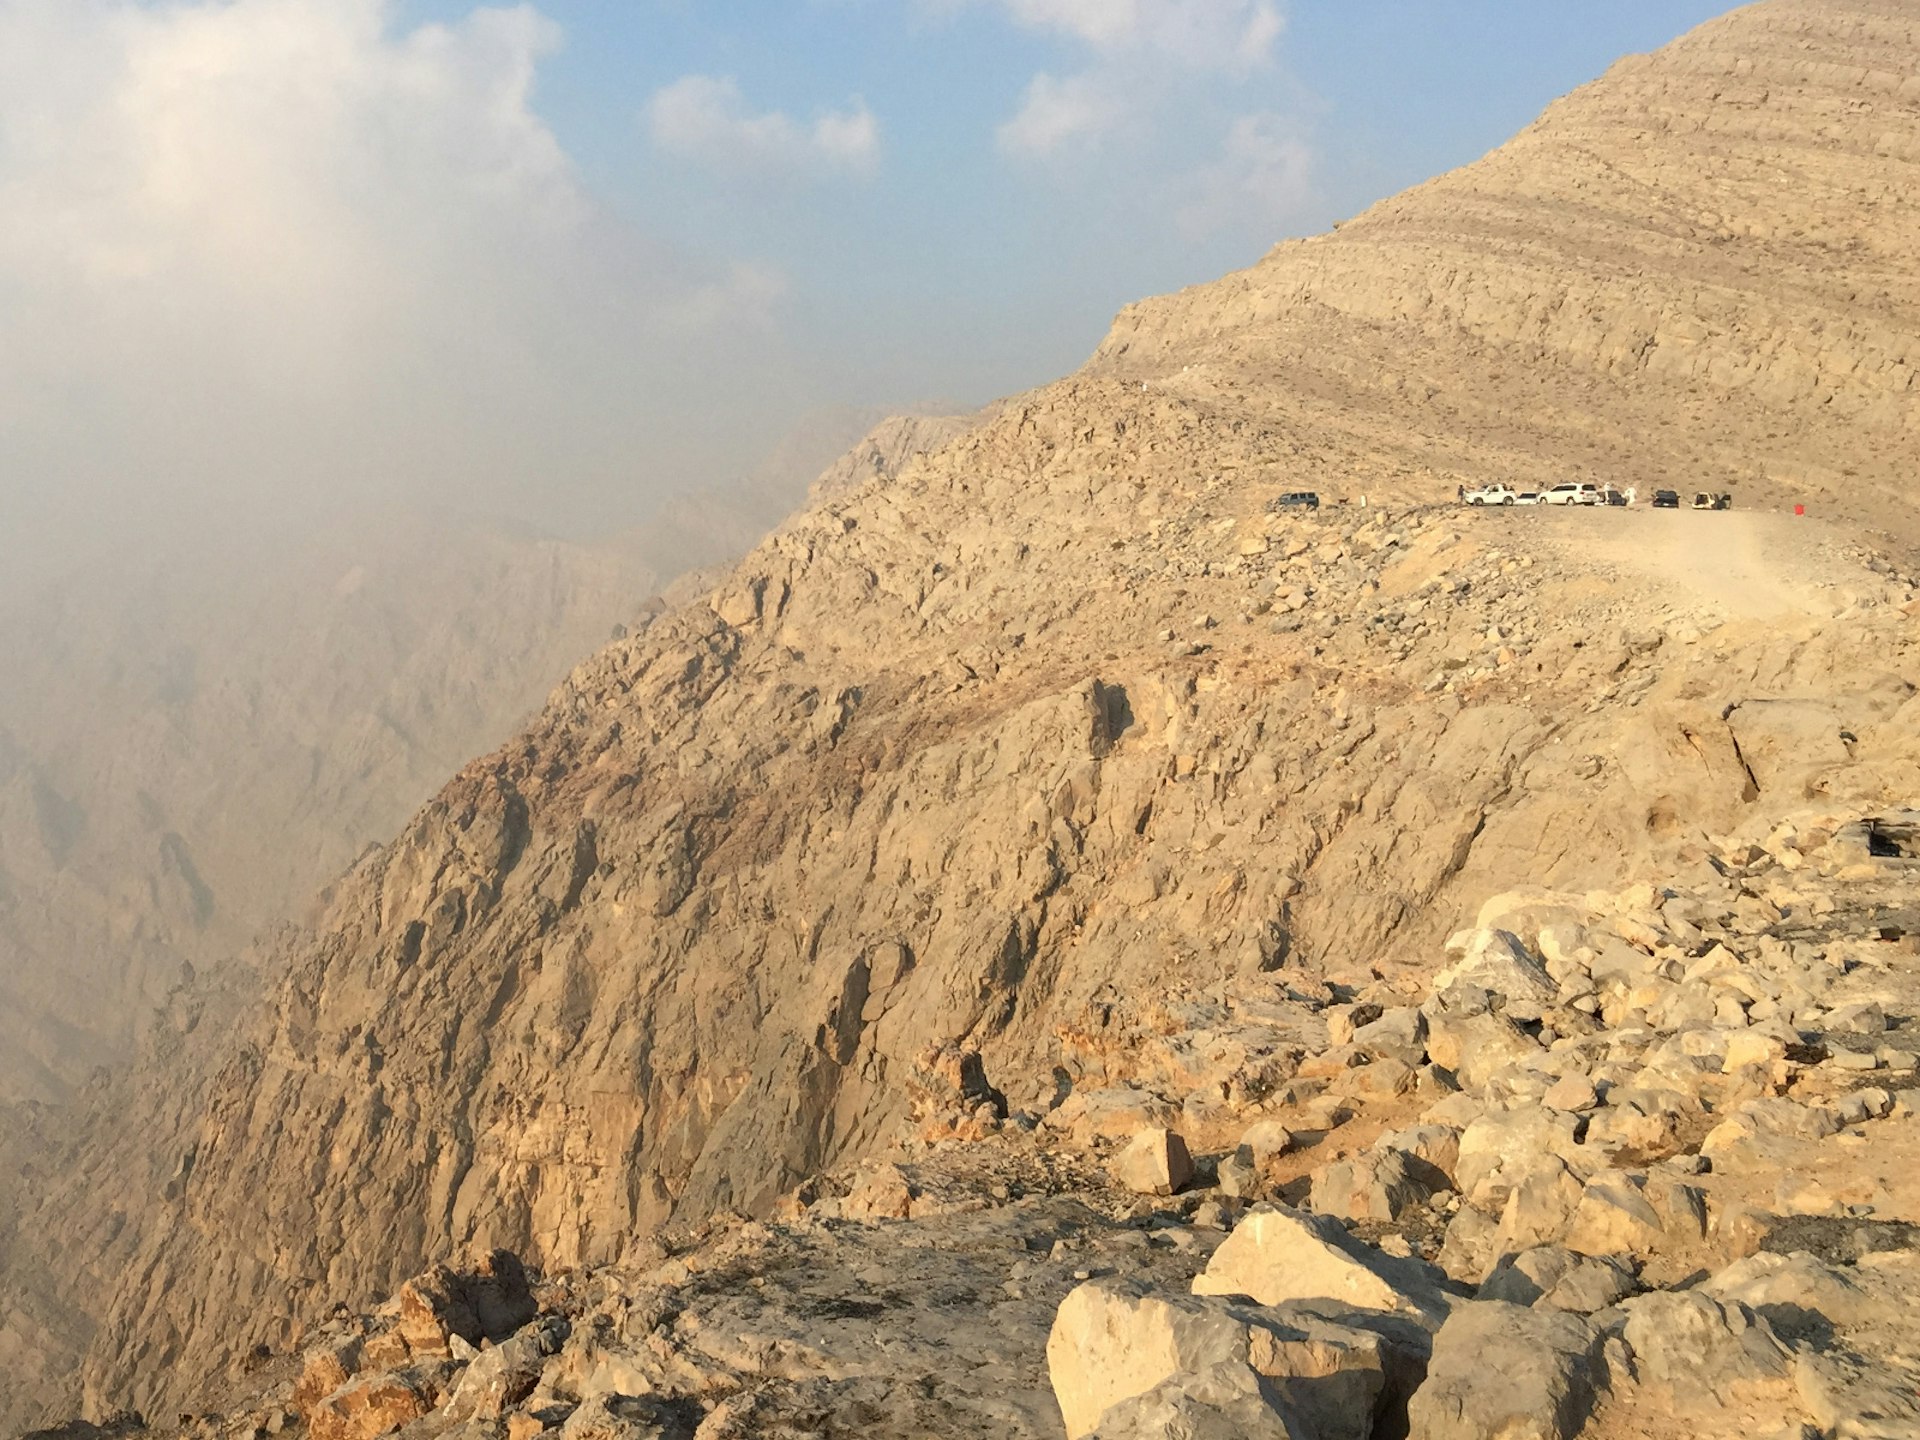 The road up Jebel Jais may end abruptly, but as they say, it's the journey not the destination. Image by Lauren Keith / Lonely Planet